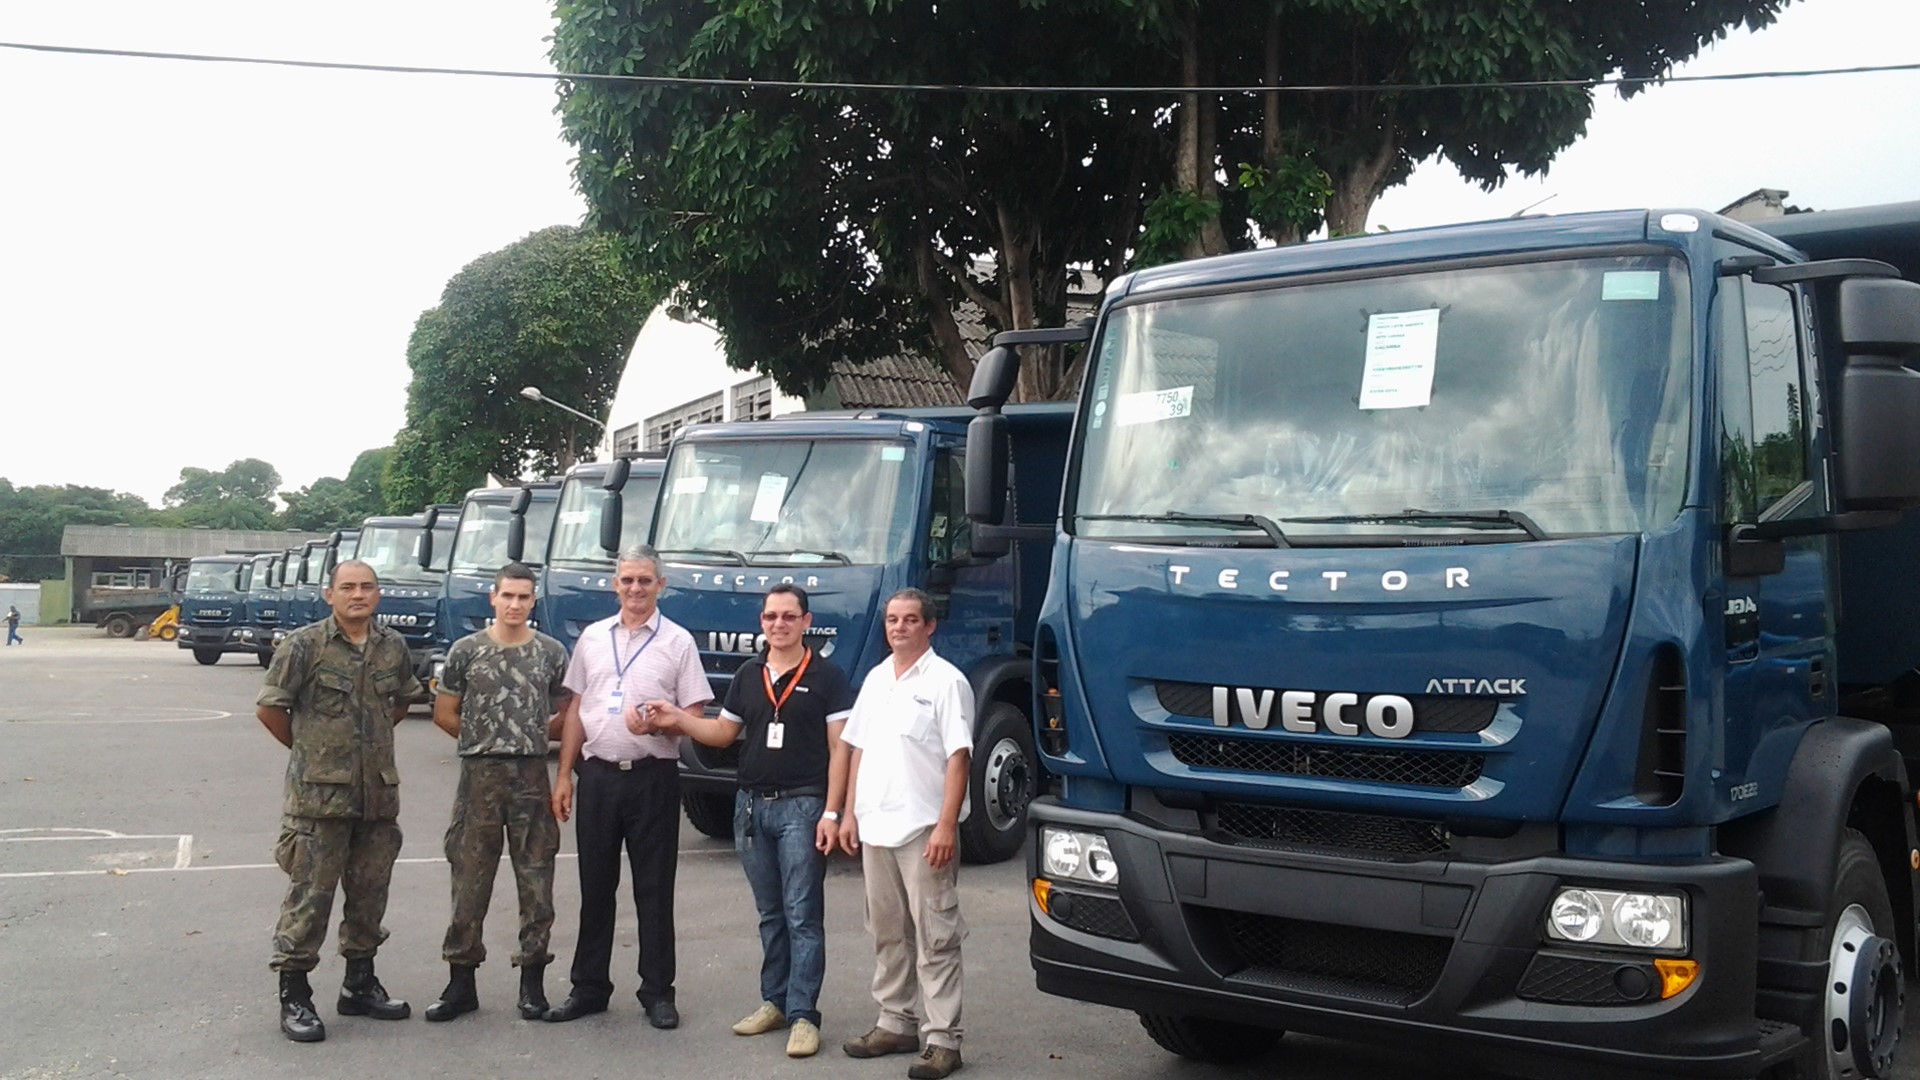 CNH Industrial brand Iveco supplies 10 Tector Attack vehicles to Brazil's Air Force